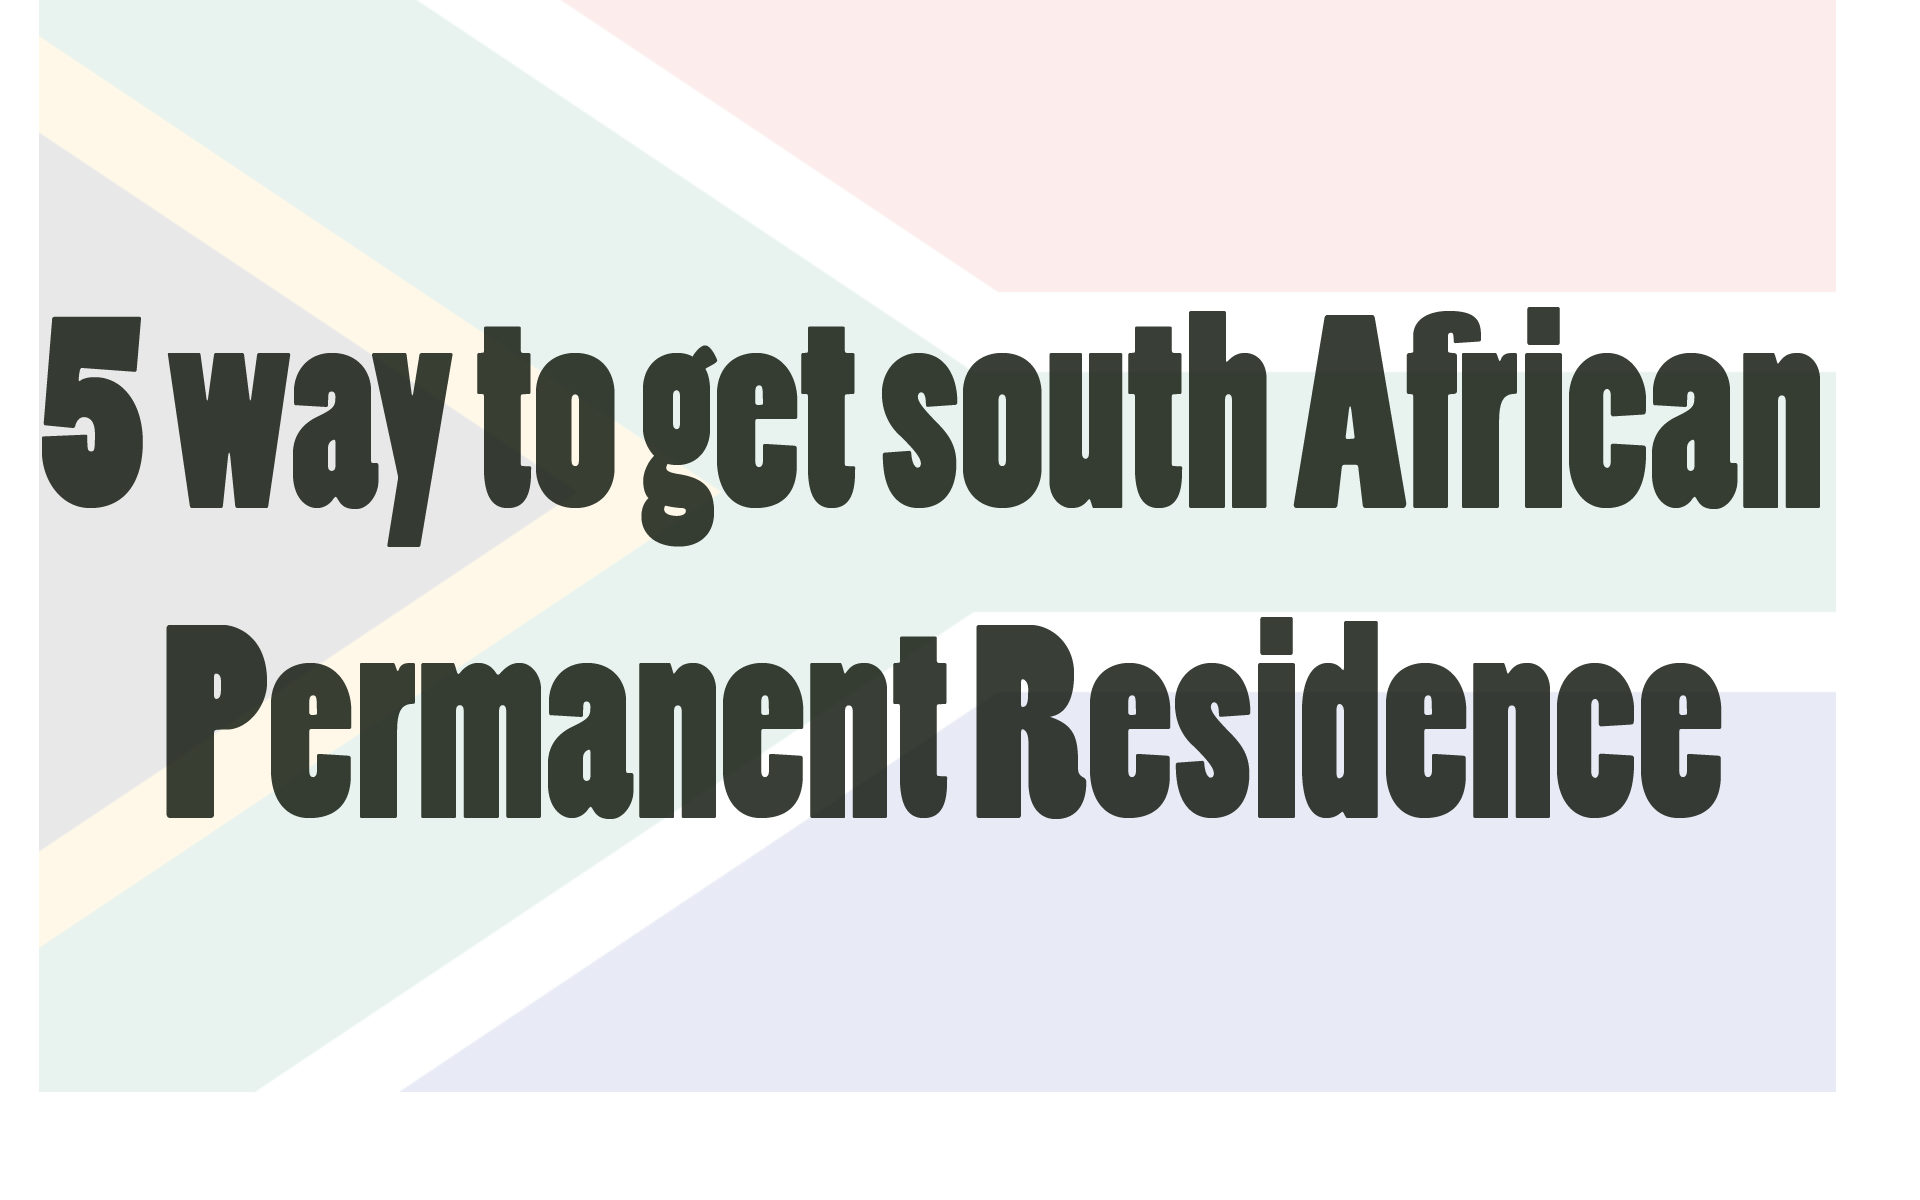 5 Ways to Get South African Permanent Residence 